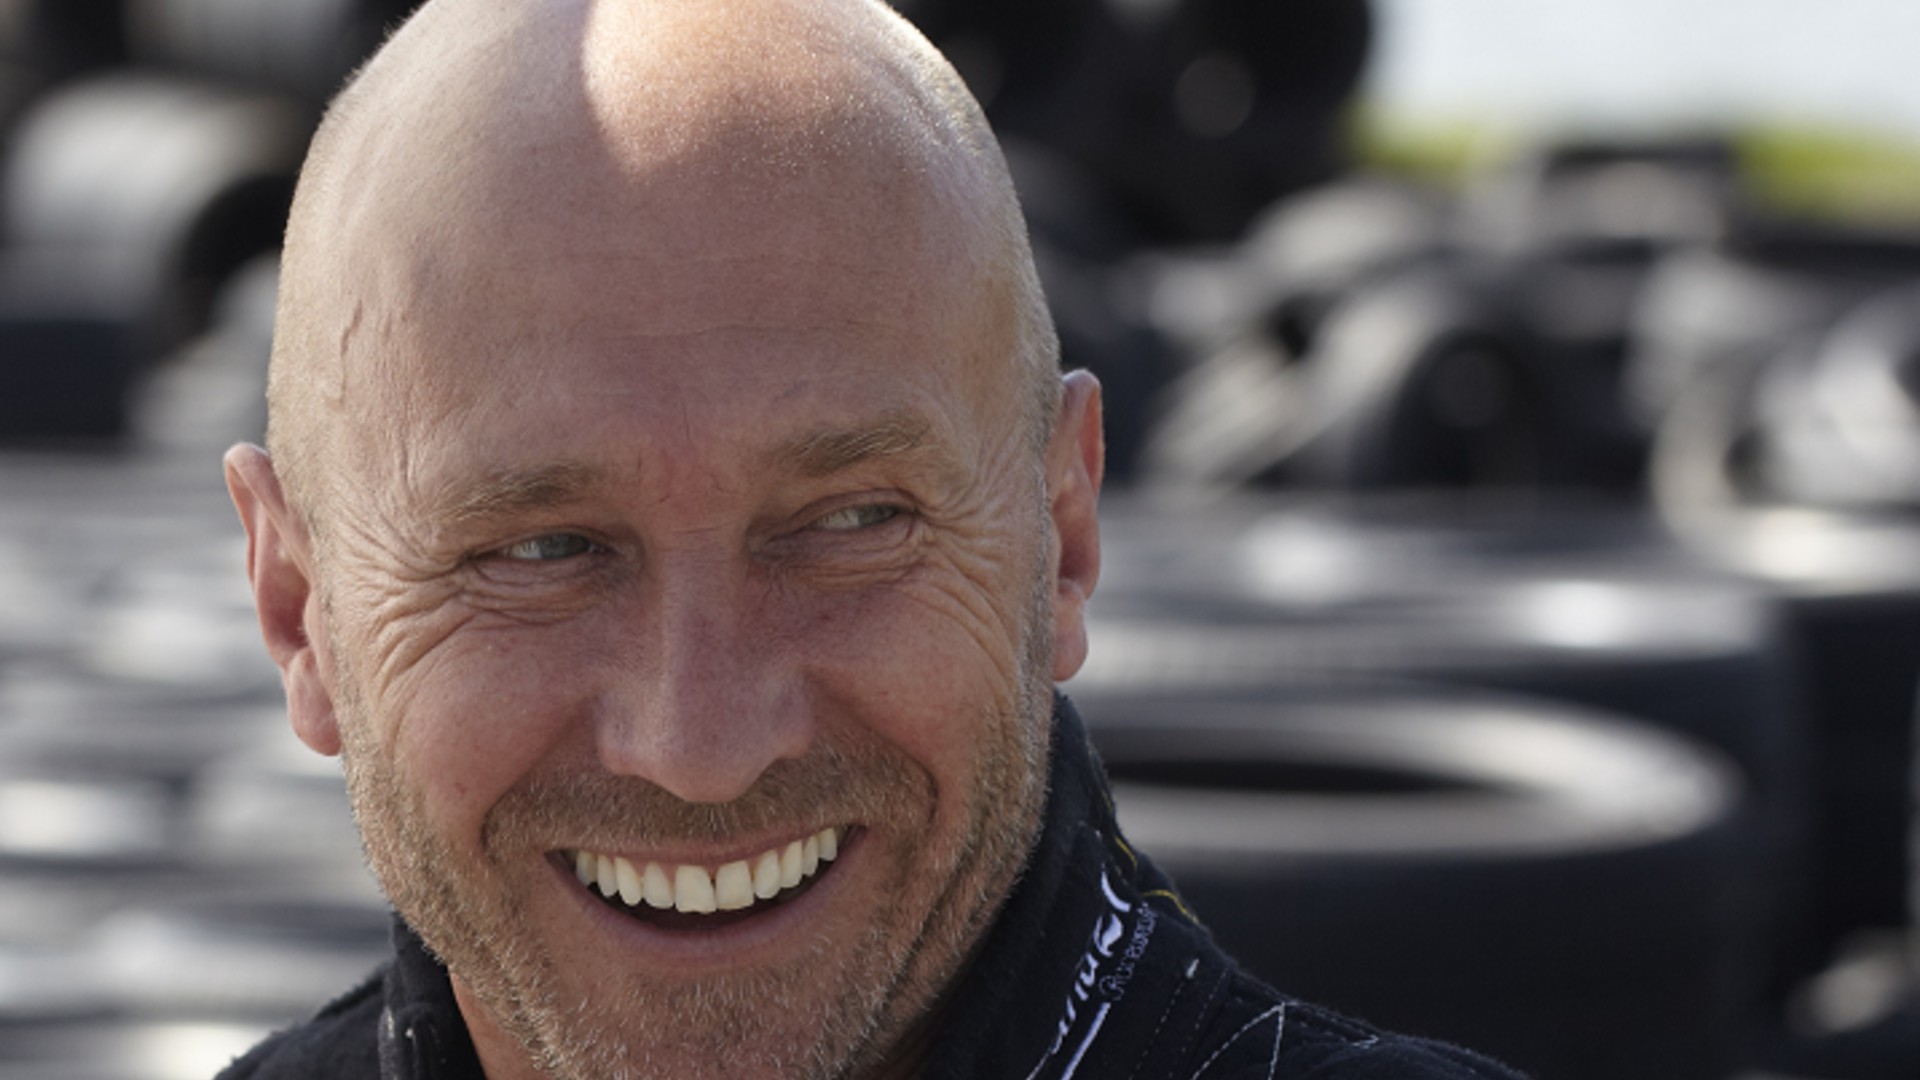 antik anspore systematisk The original Stig is going racing again - Motoring Research